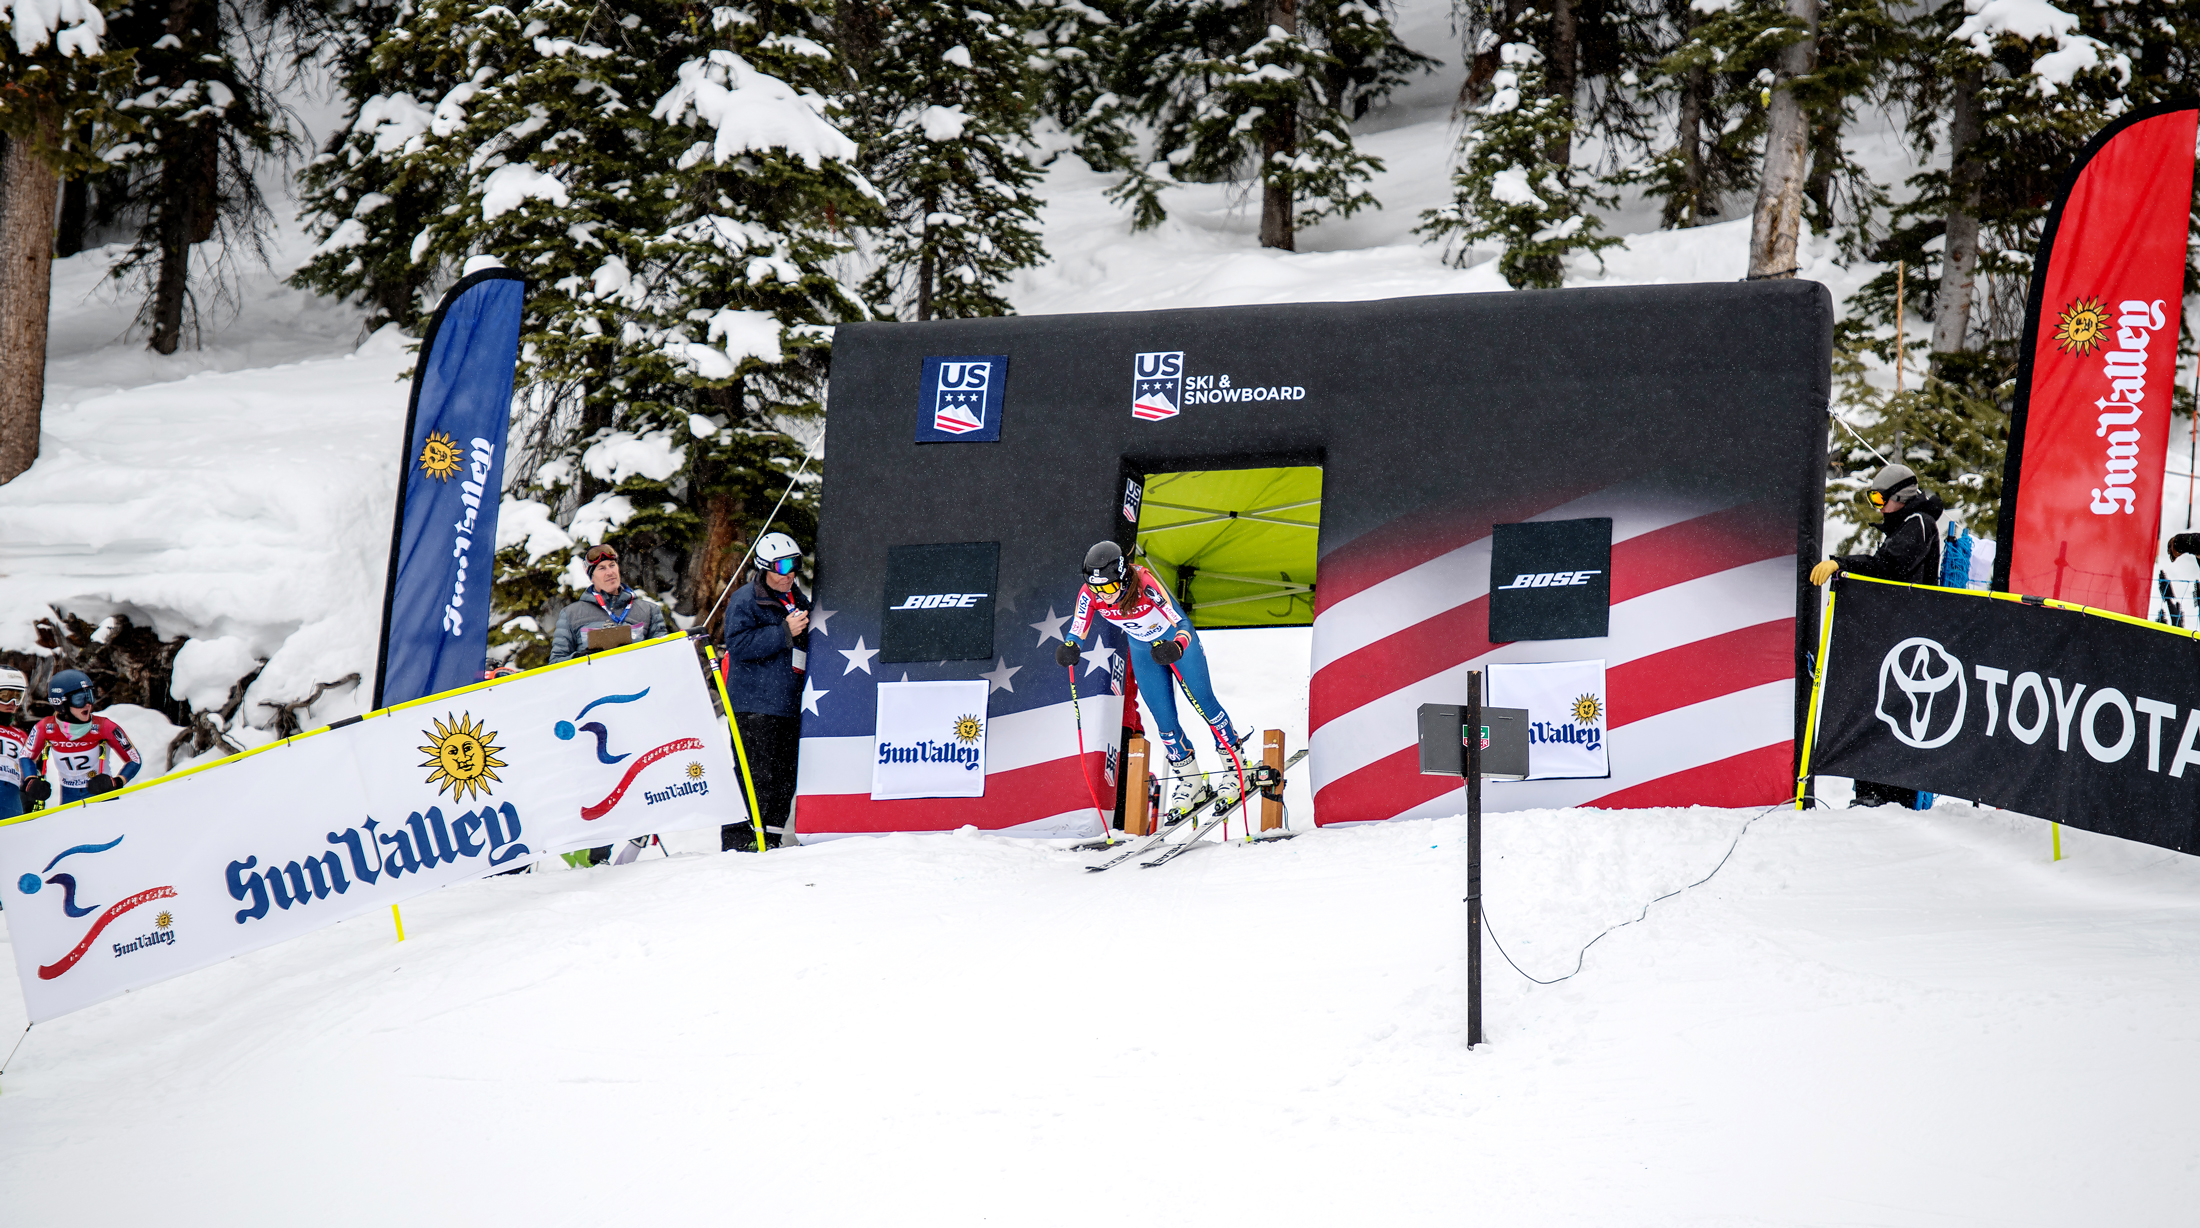 A.J. Hurt kicks out of the start of the first-run super-G at the Toyota U.S. Alpine Championships in Sun Valley, Idaho. (Nils Ribi Photography)